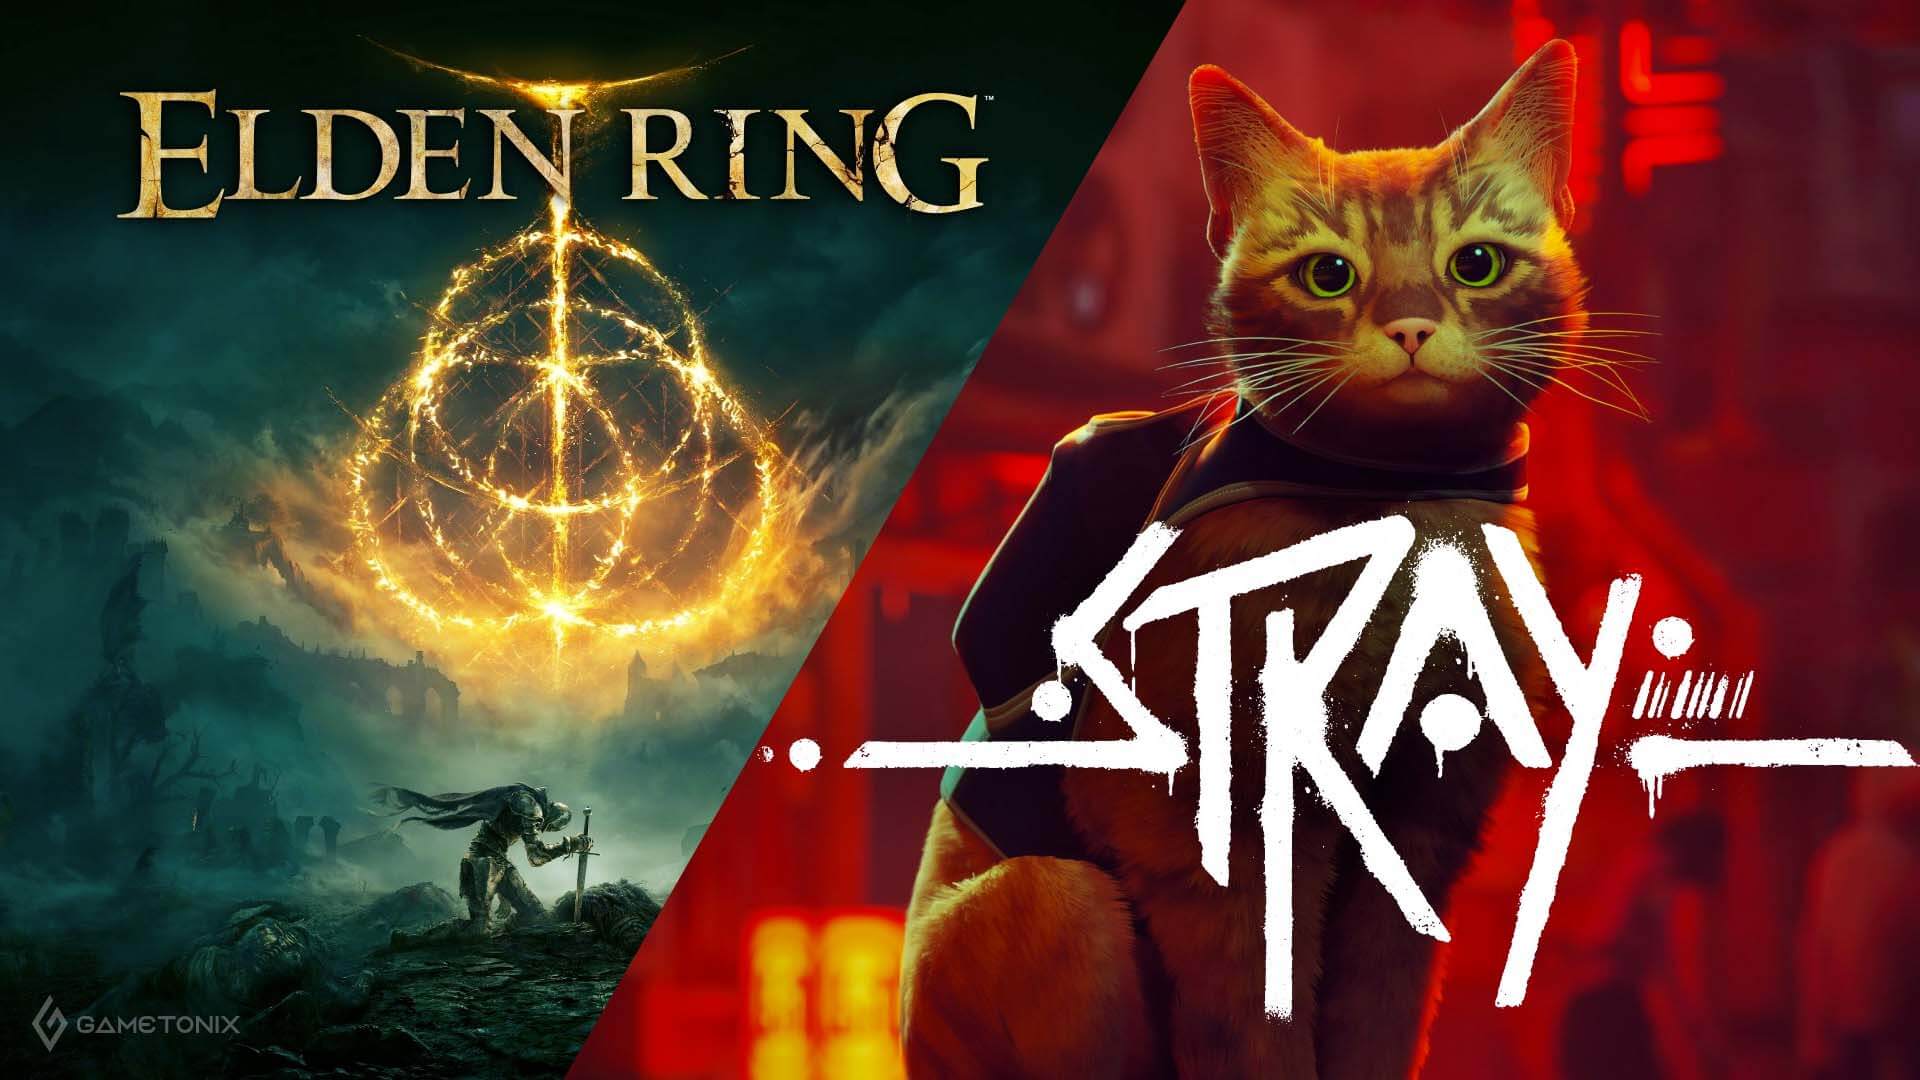 Stray and Elden Ring